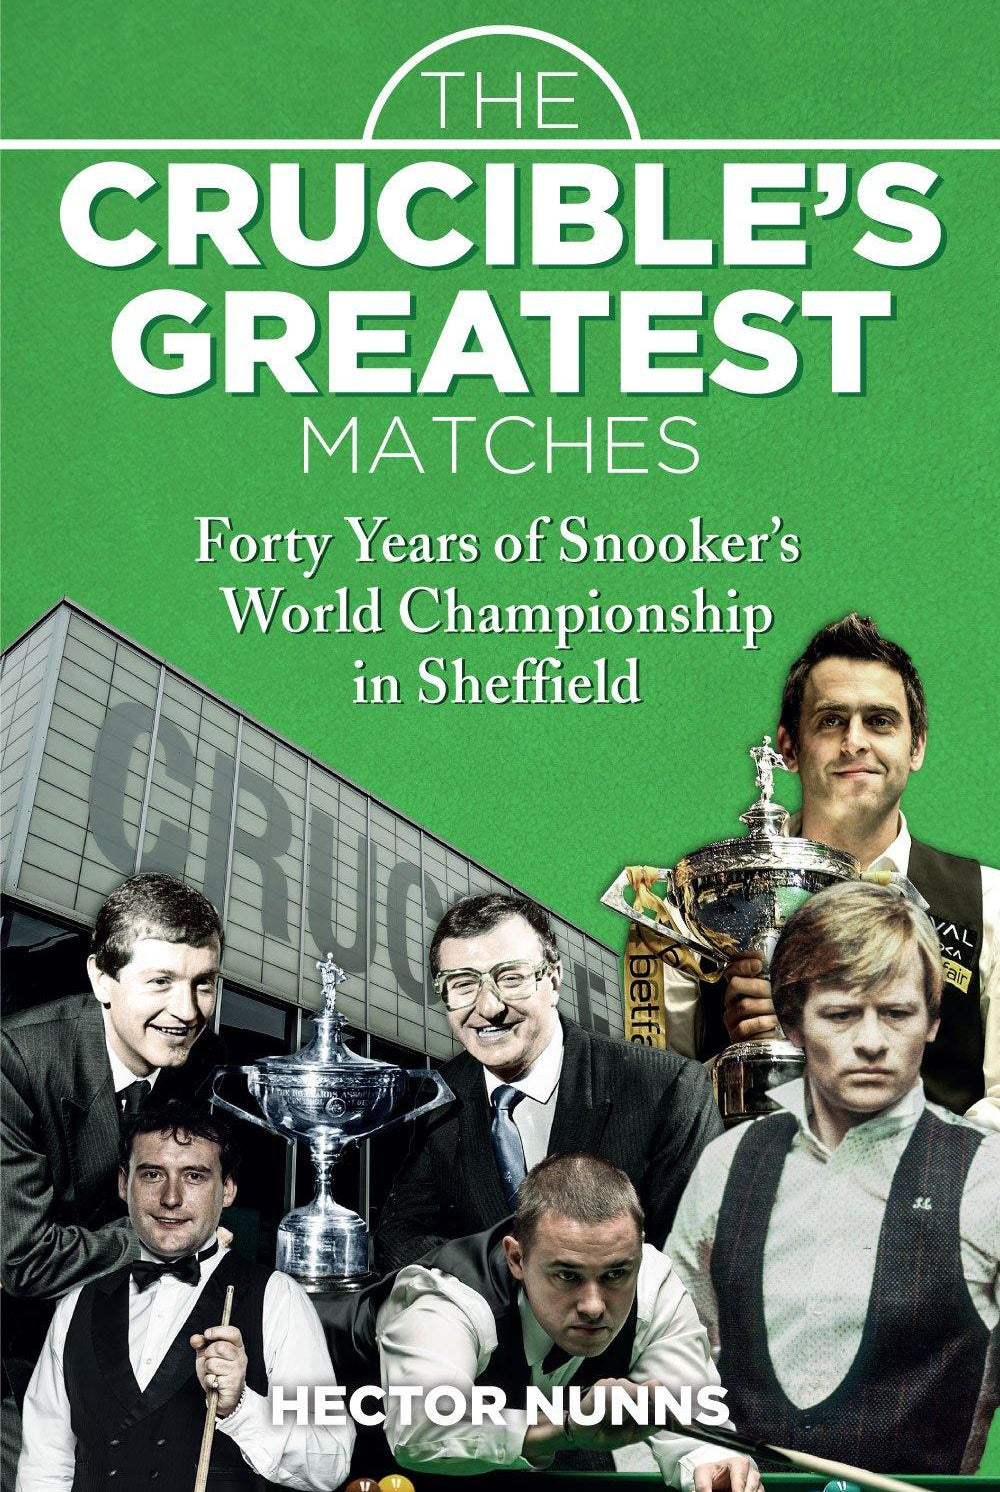 The Crucible's Greatest Matches: Forty Years of Snooker's World Championship in Sheffield - Belfast Books